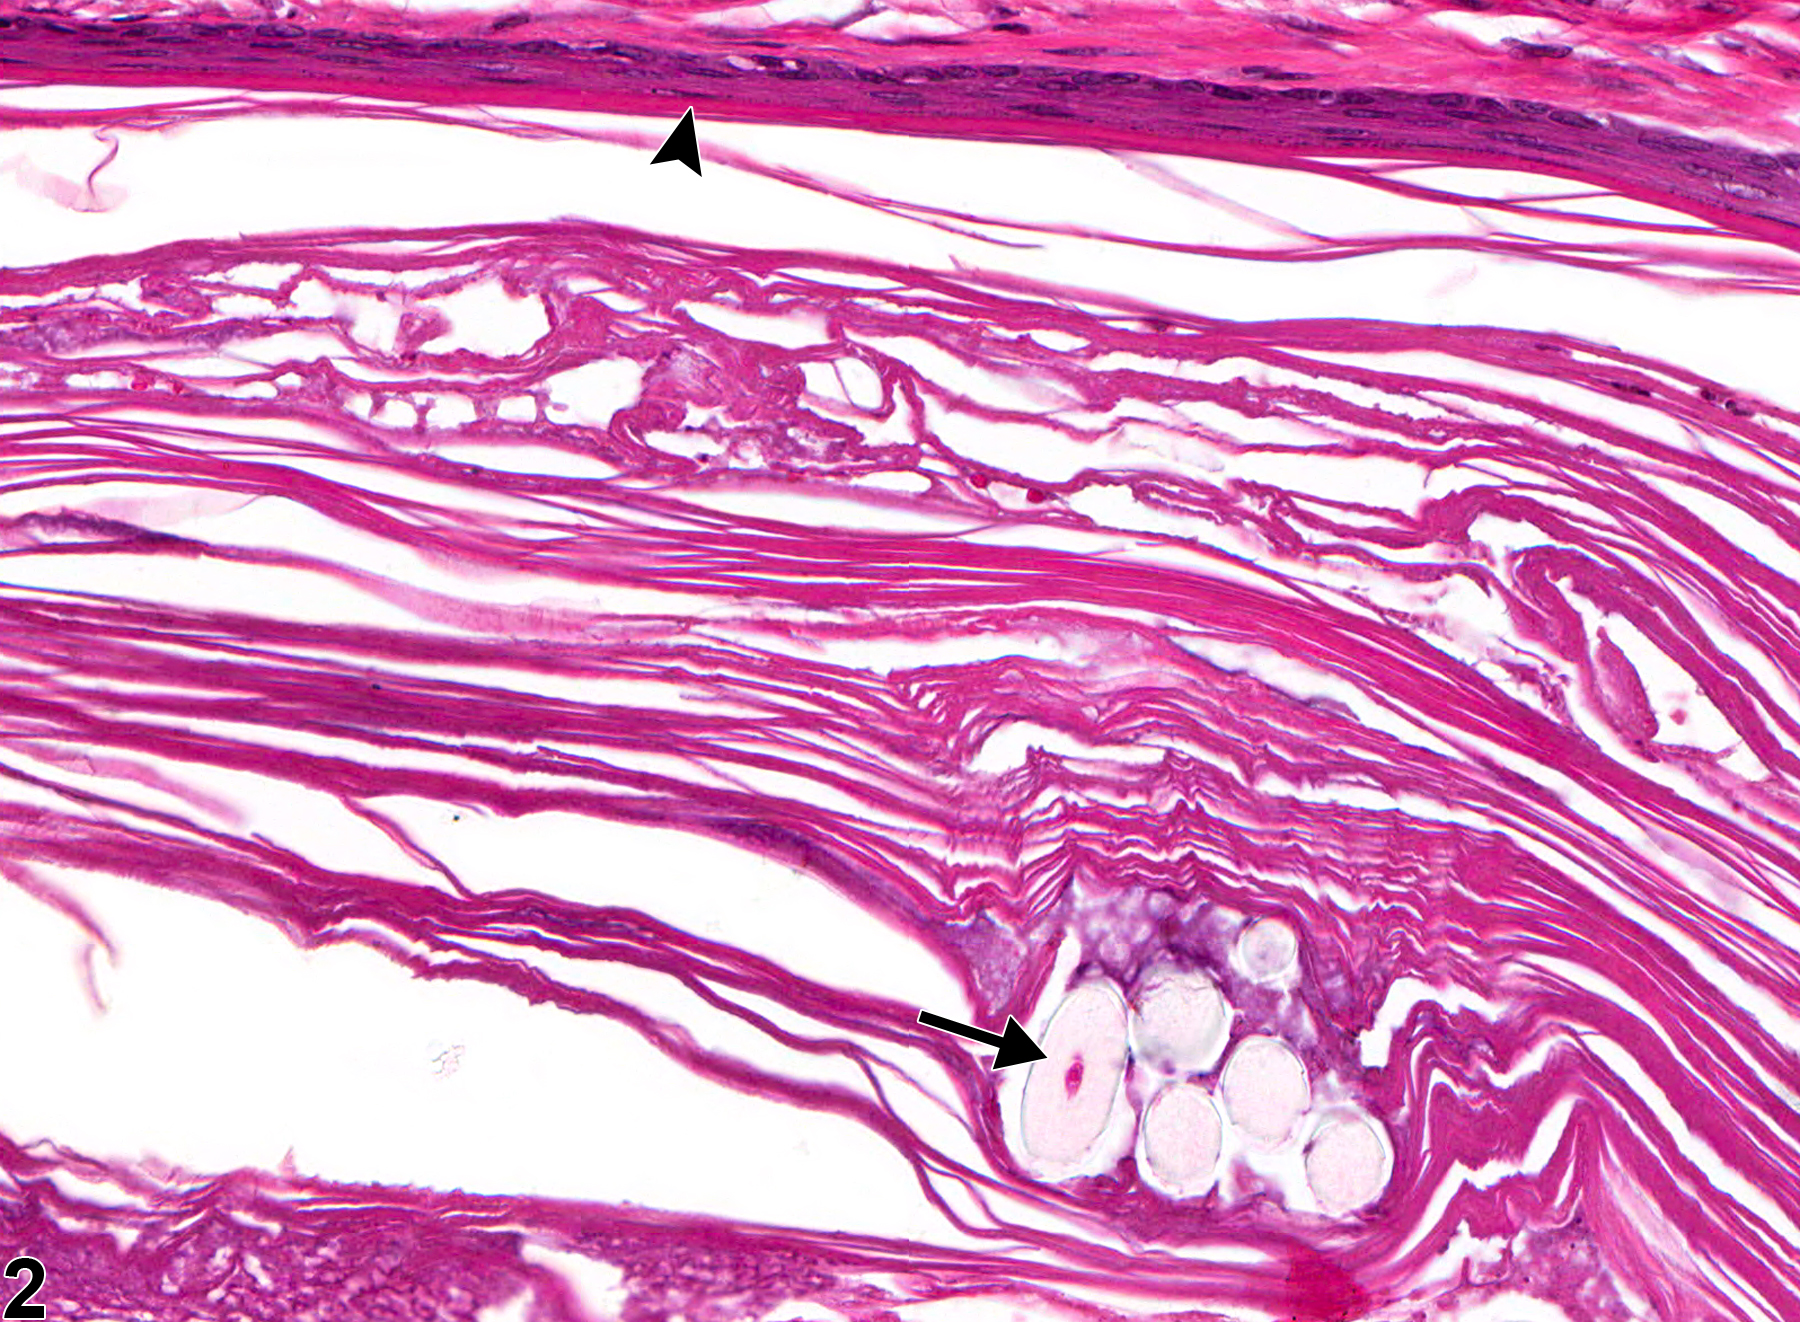 Image of periodontal pocket in the tooth from a male F344/N rat in a chronic study